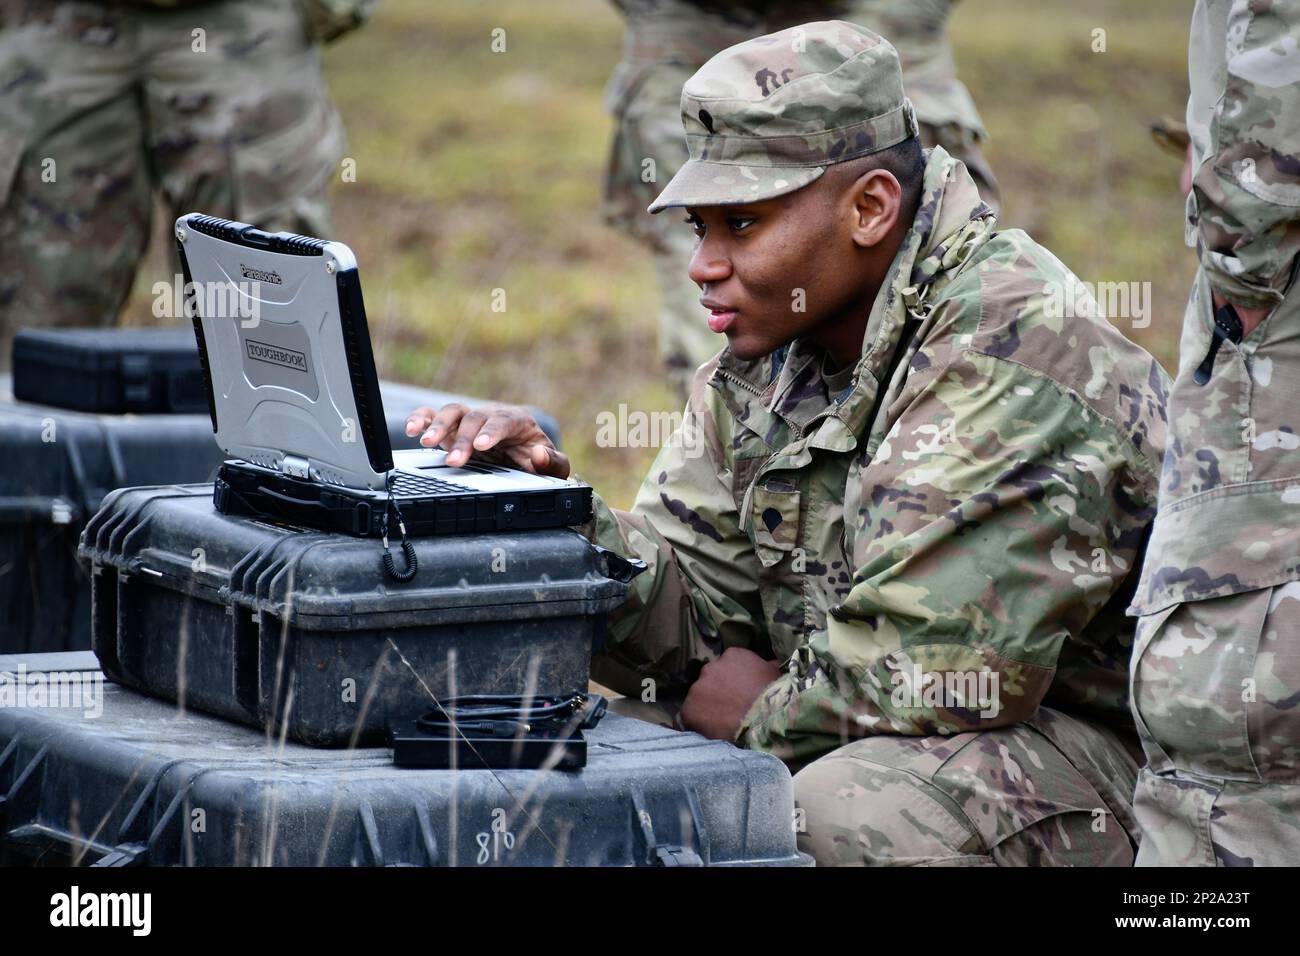 A U.S. Soldier with Palehorse Troop, 4th Squadron, 2nd Cavalry Regiment operates a monitor during a training exercise with an RQ-11 Raven, a Small Unmanned Aircraft System, at the 7th Army Training Command’s Grafenwoehr Training Area, Germany, Jan. 10, 2023. 2CR provides V Corps with a lethal and agile force capable of rapid deployment throughout the European theater in order to assure allies, deter adversaries, and when ordered, defend the NATO alliance. Stock Photo